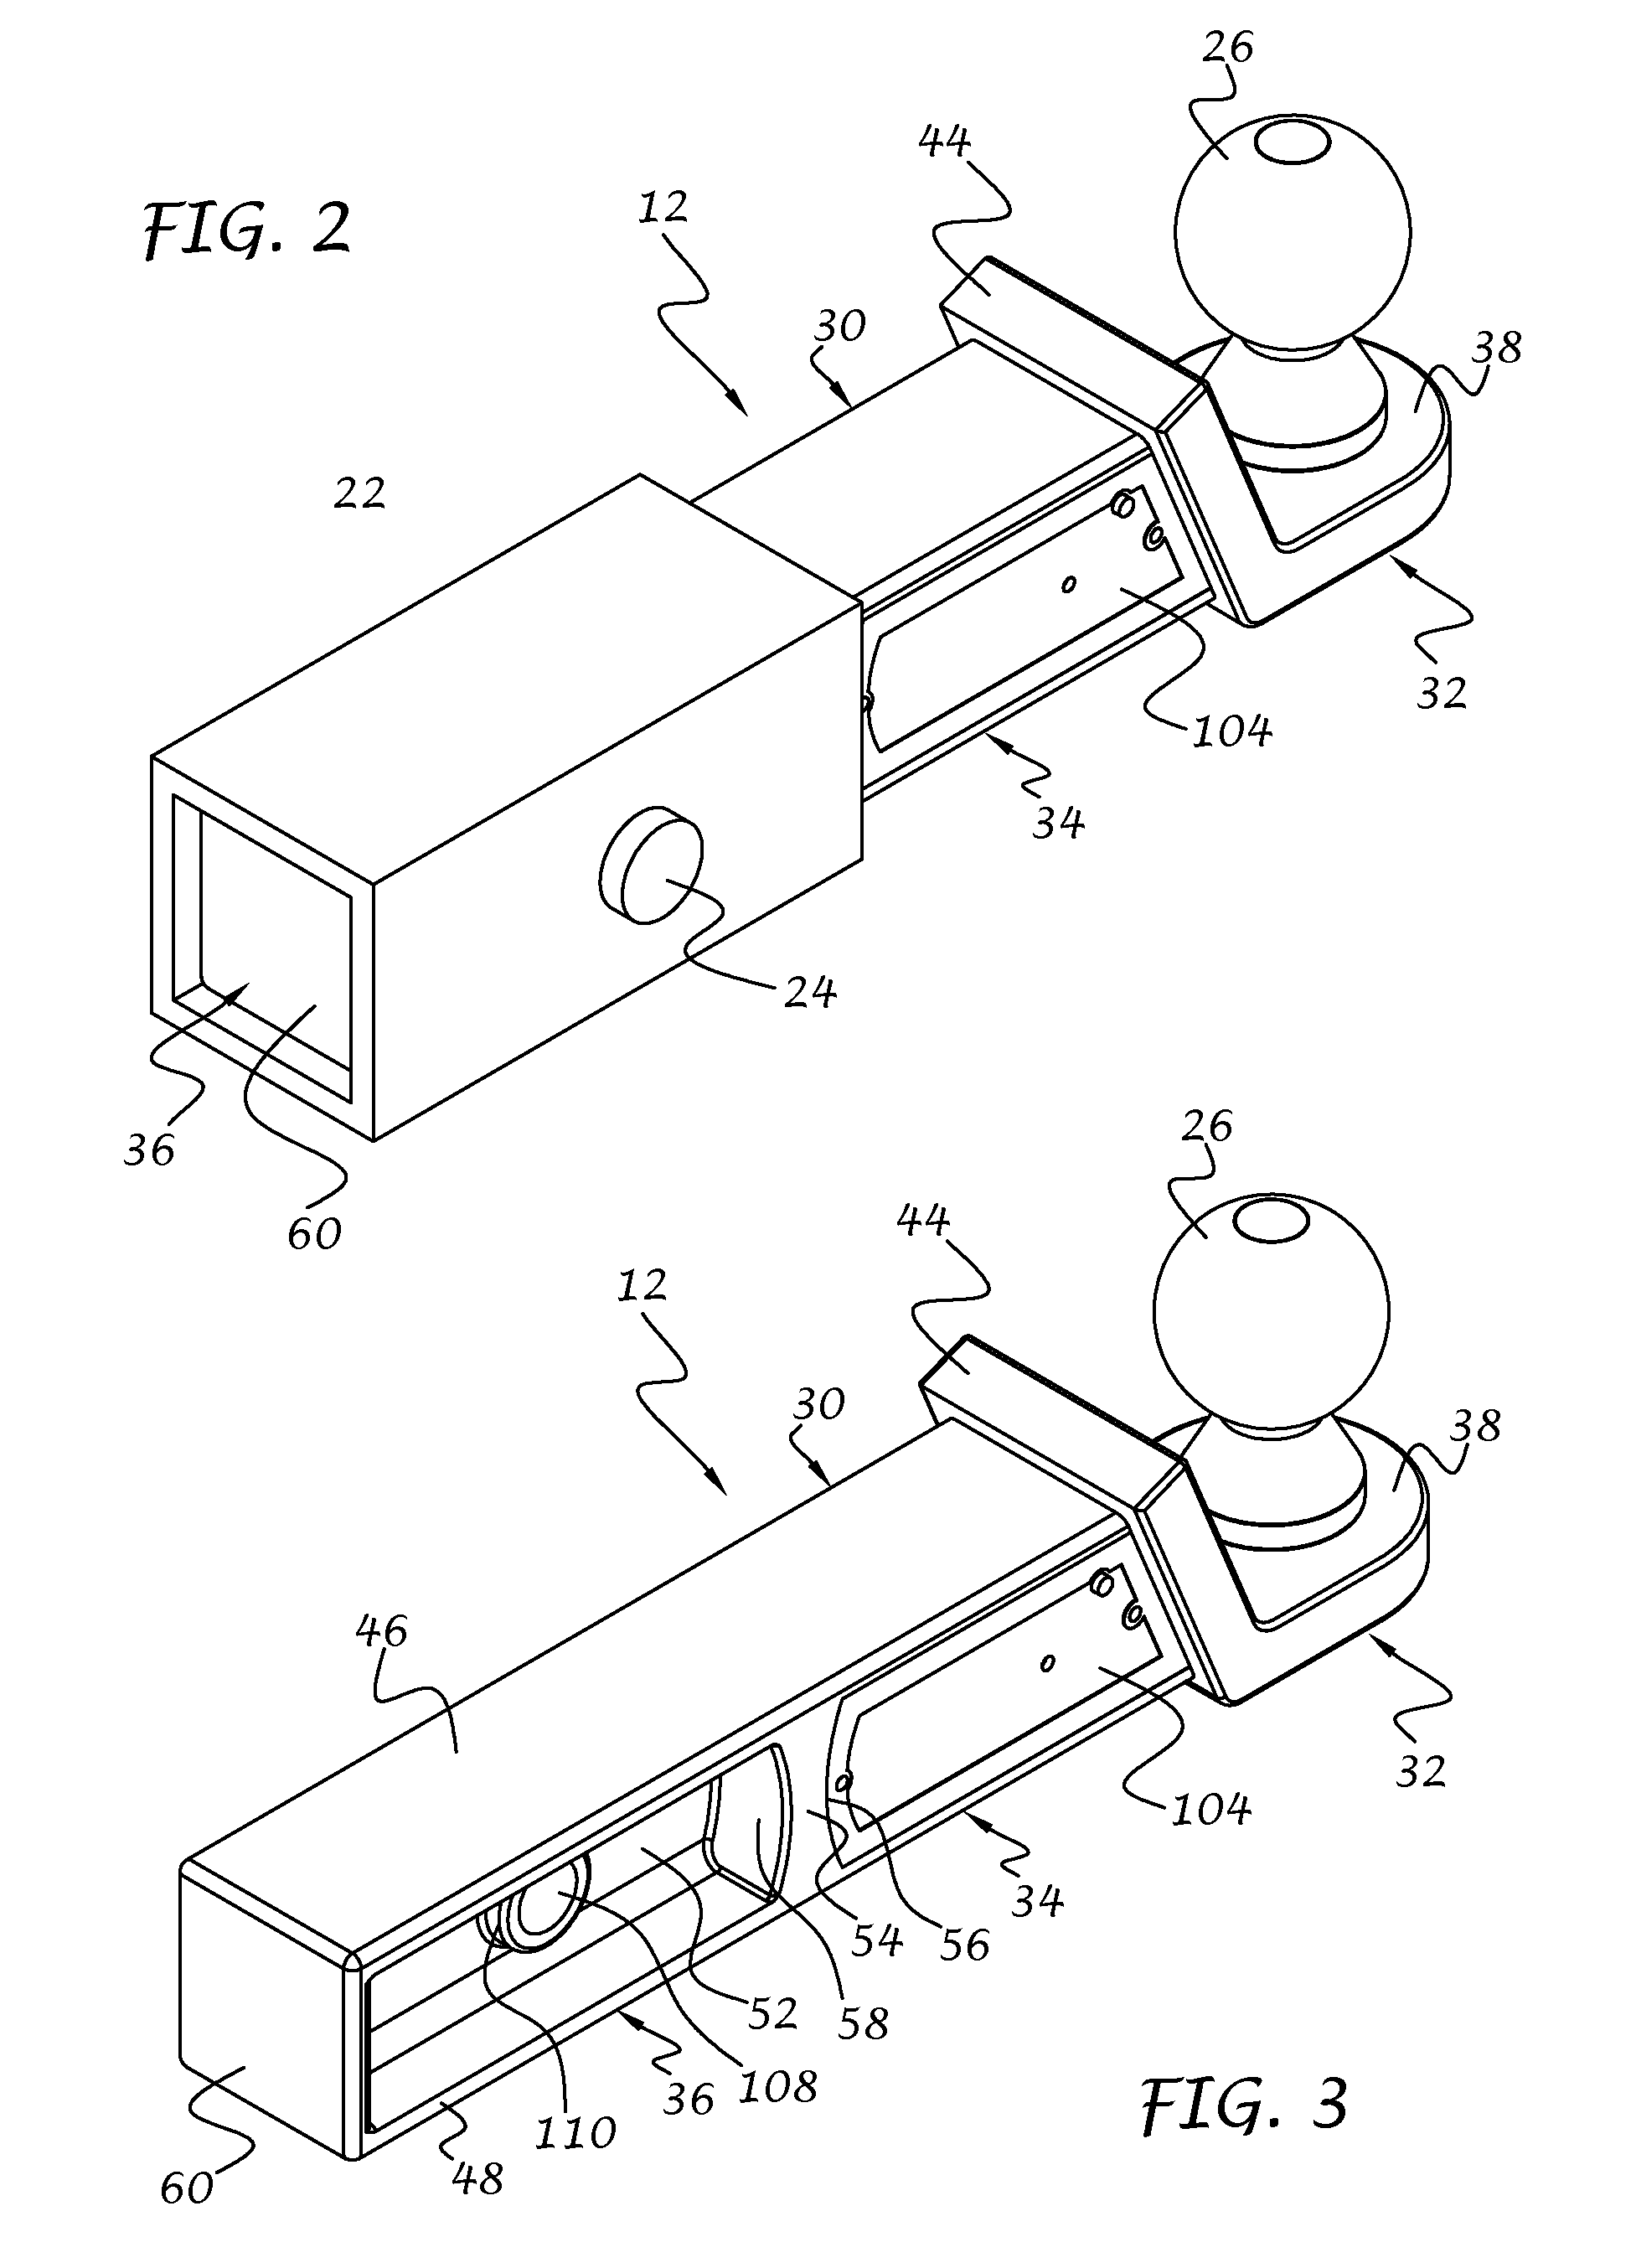 System and method for gauging safe towing parameters